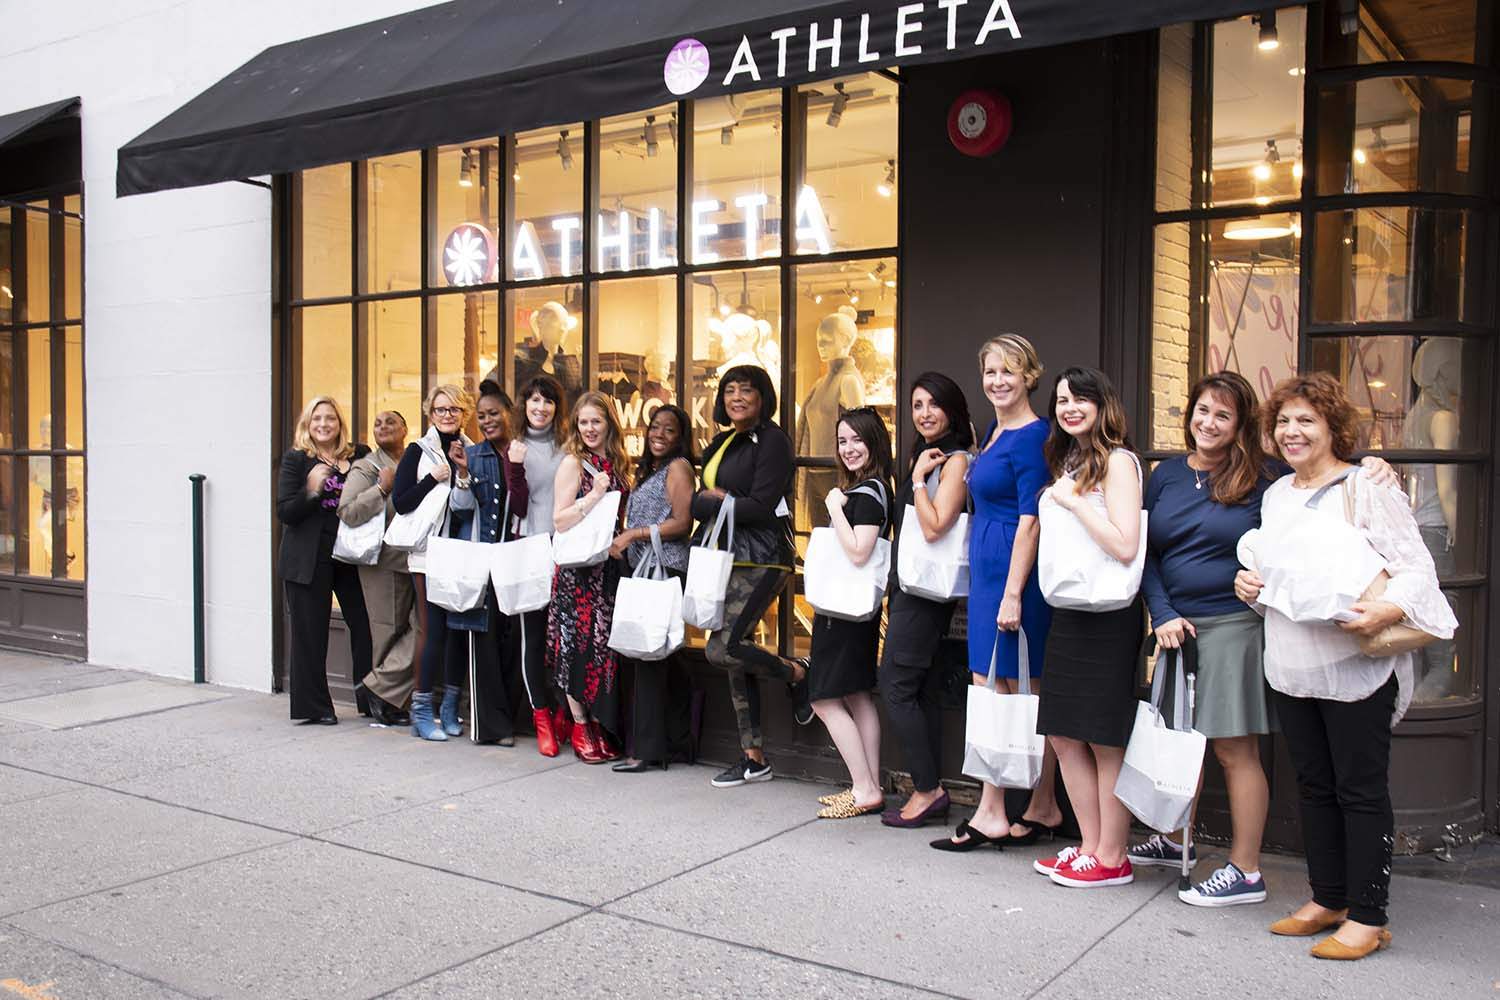 We Exercised Our Mouths at Athleta